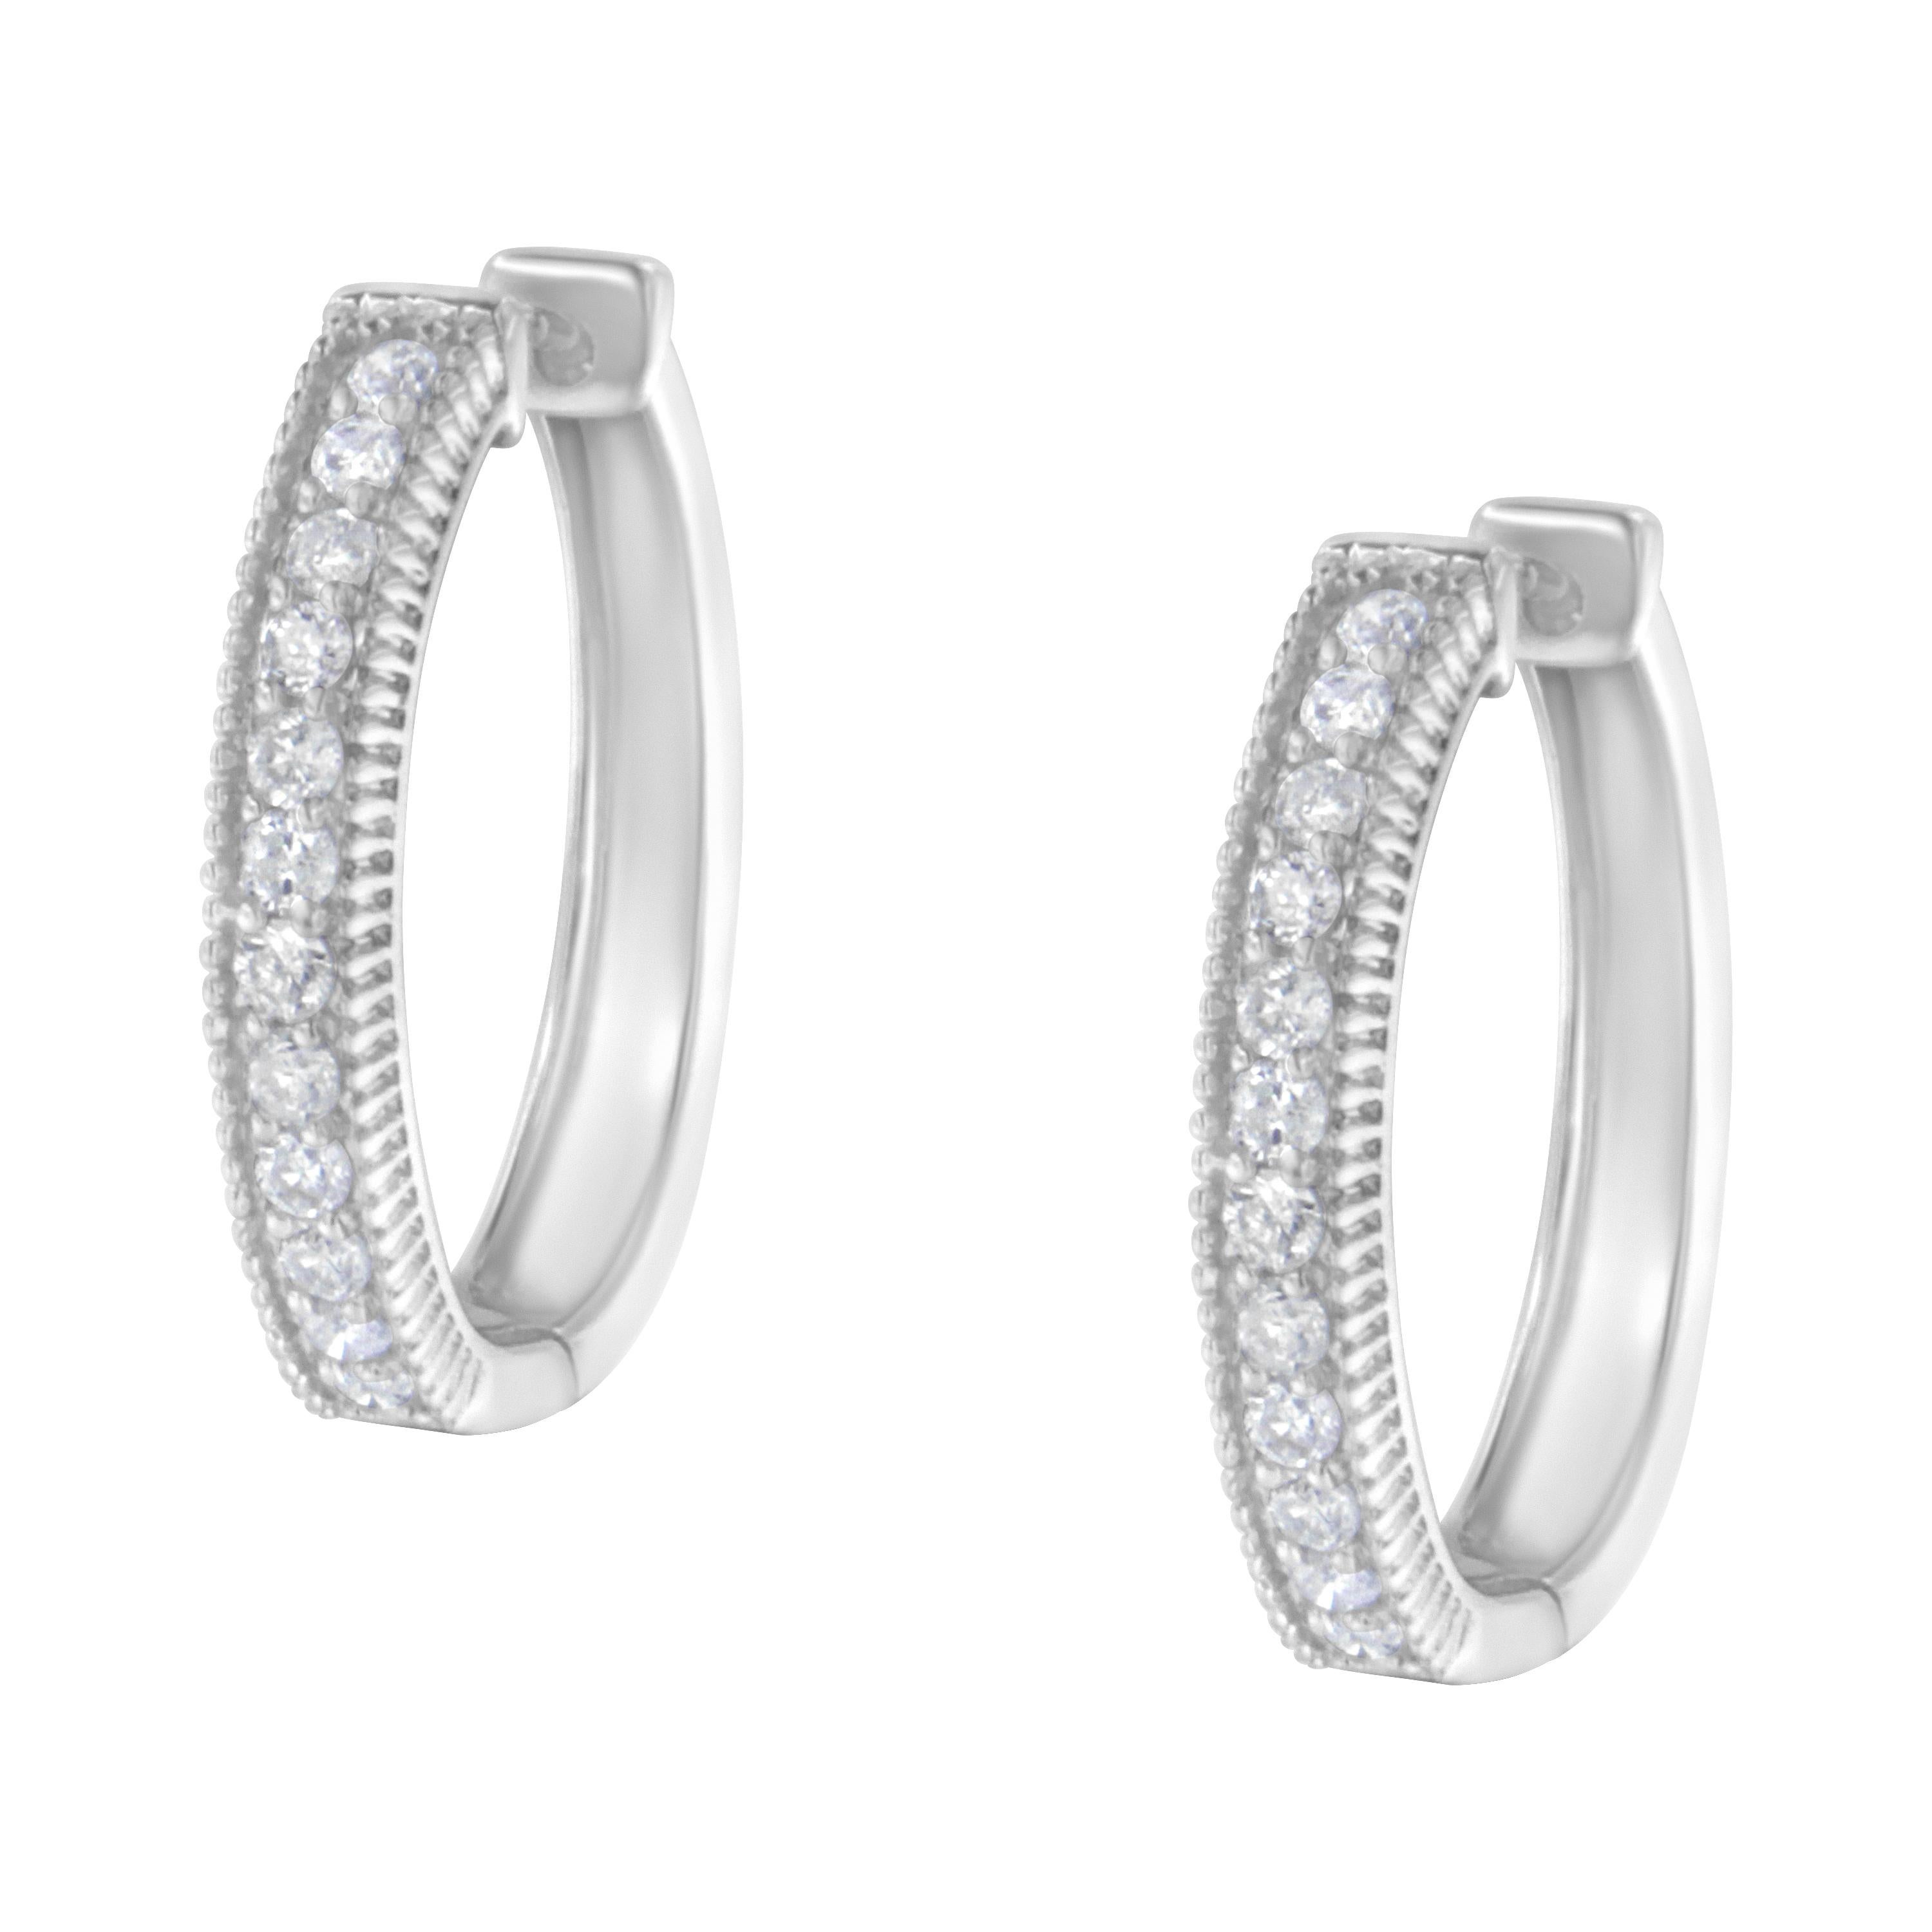 Contemporary 10K White Gold 1.00 Carat Diamond Hoop Earring For Sale